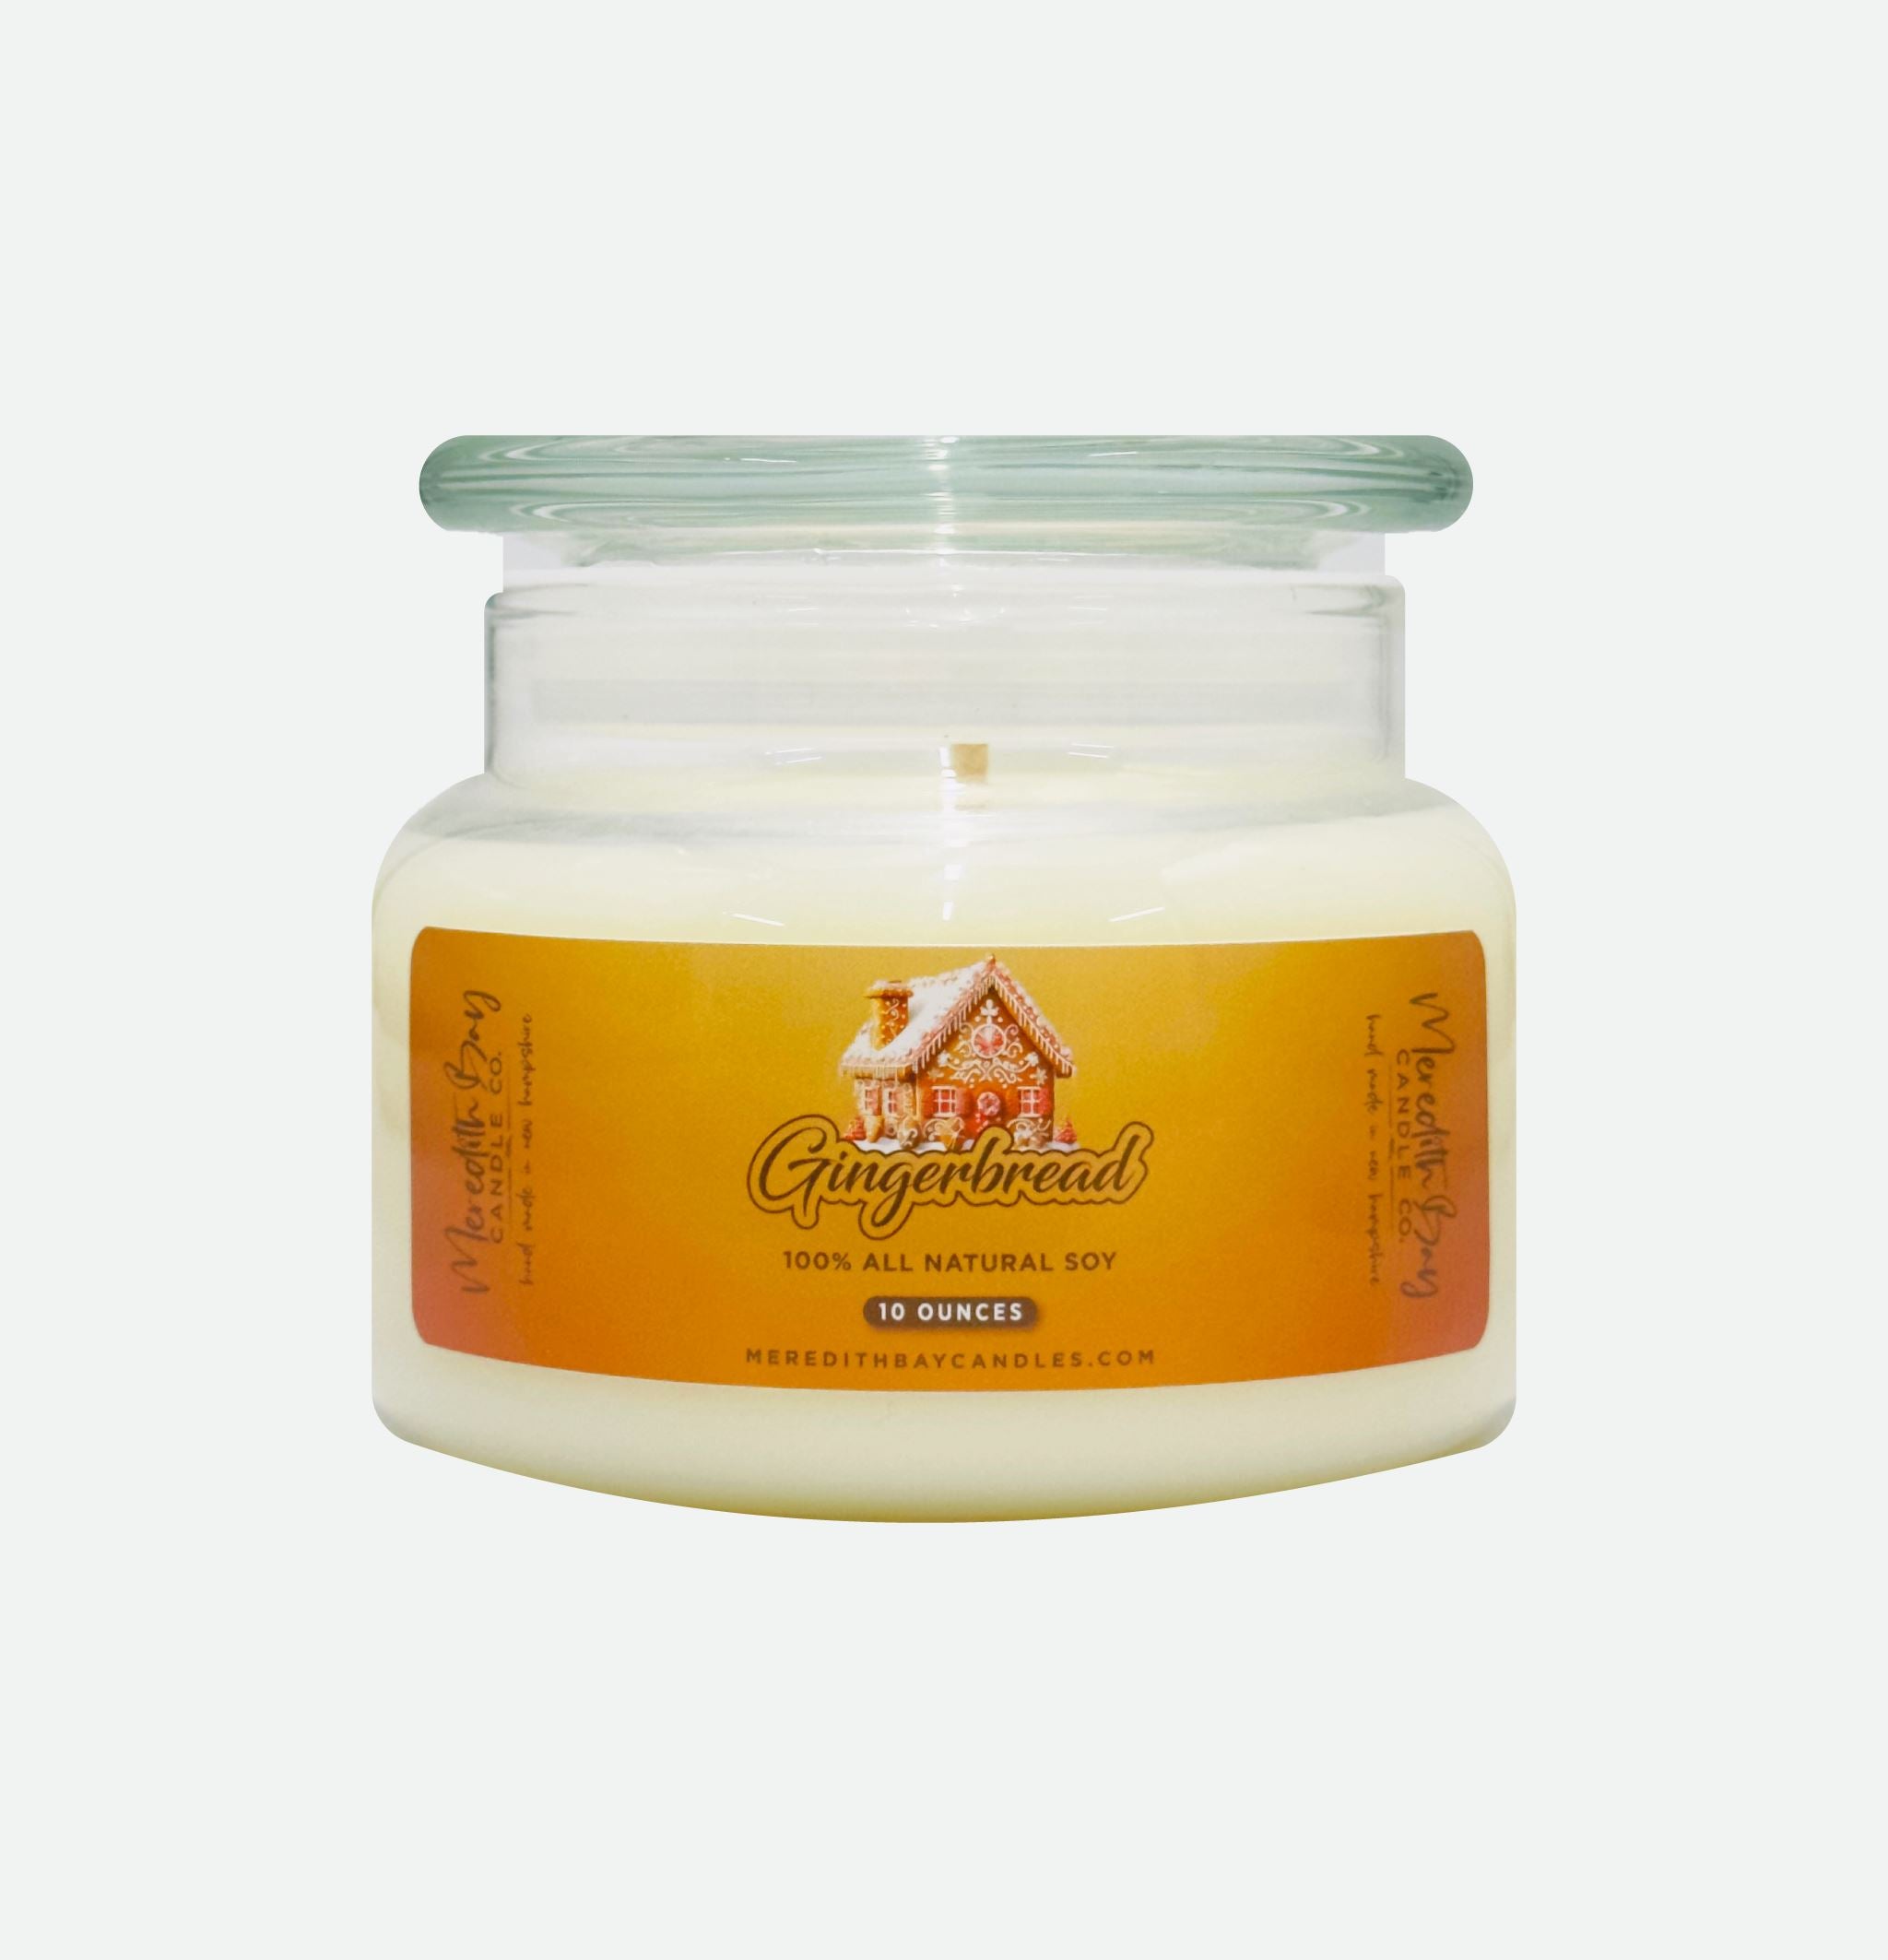 Gingerbread Soy Candle Meredith Bay Candle Co 10 Oz 